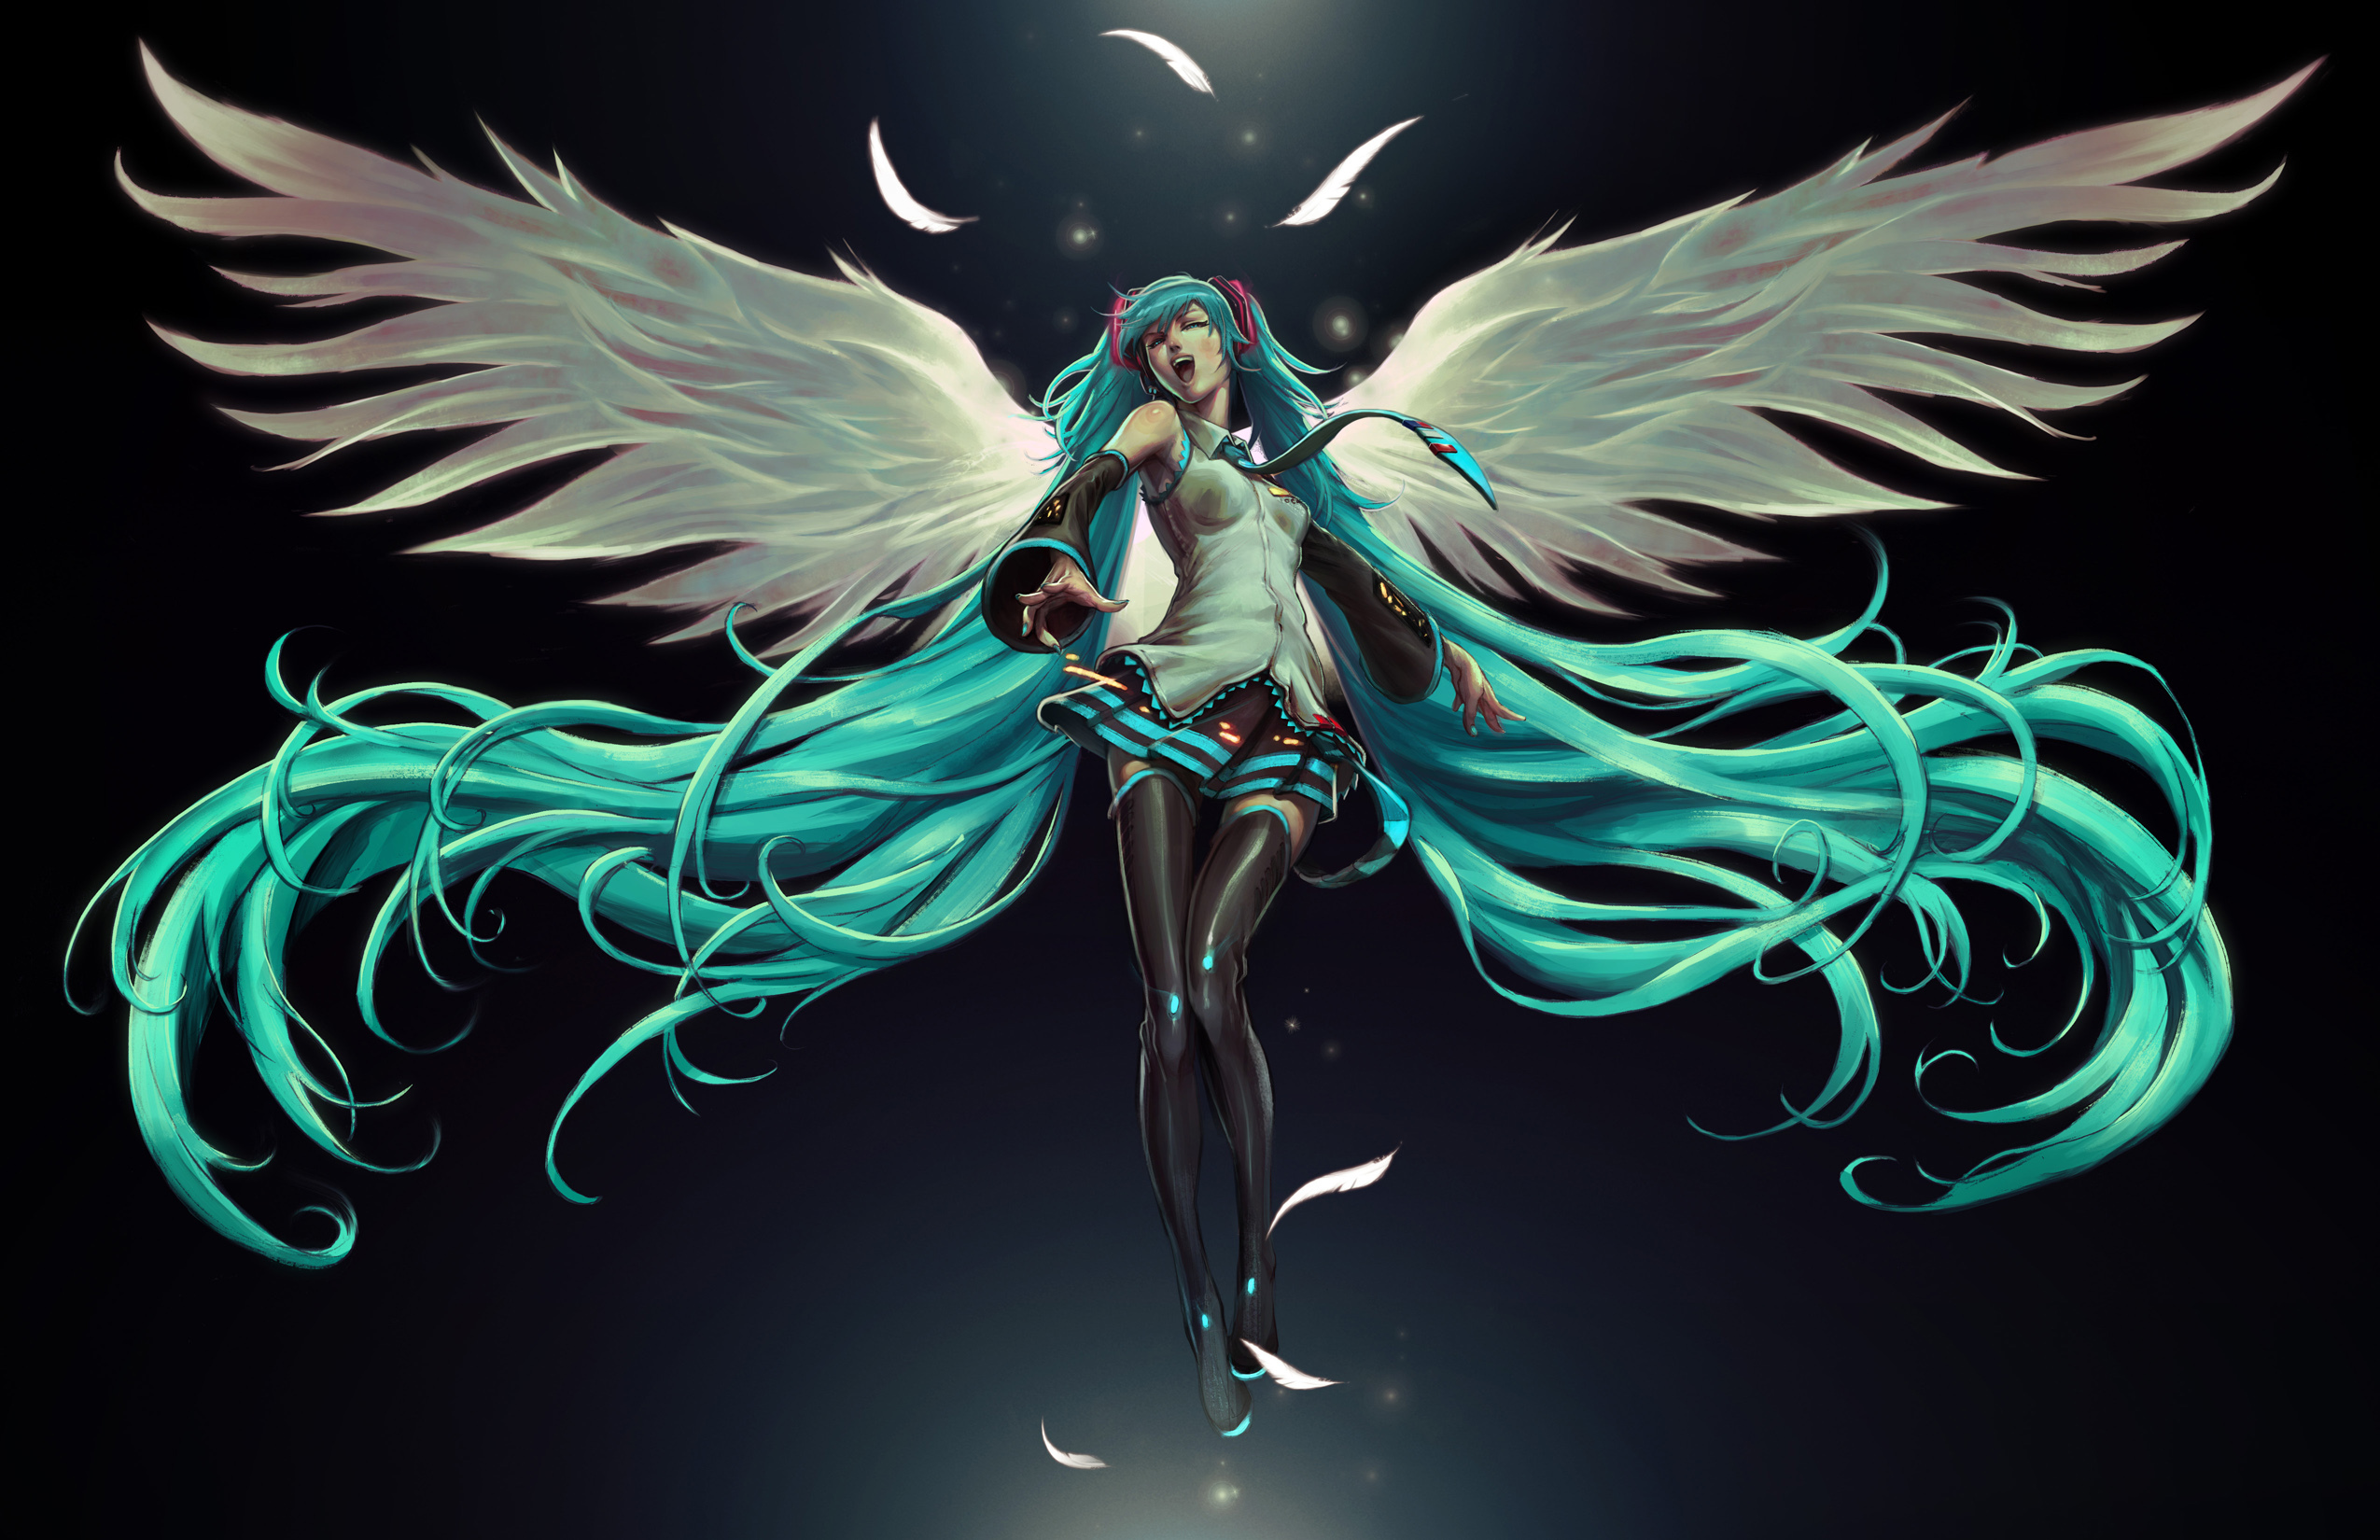 40+ Anime Girl With Wings Iphone Wallpaper Viral - Posts.id